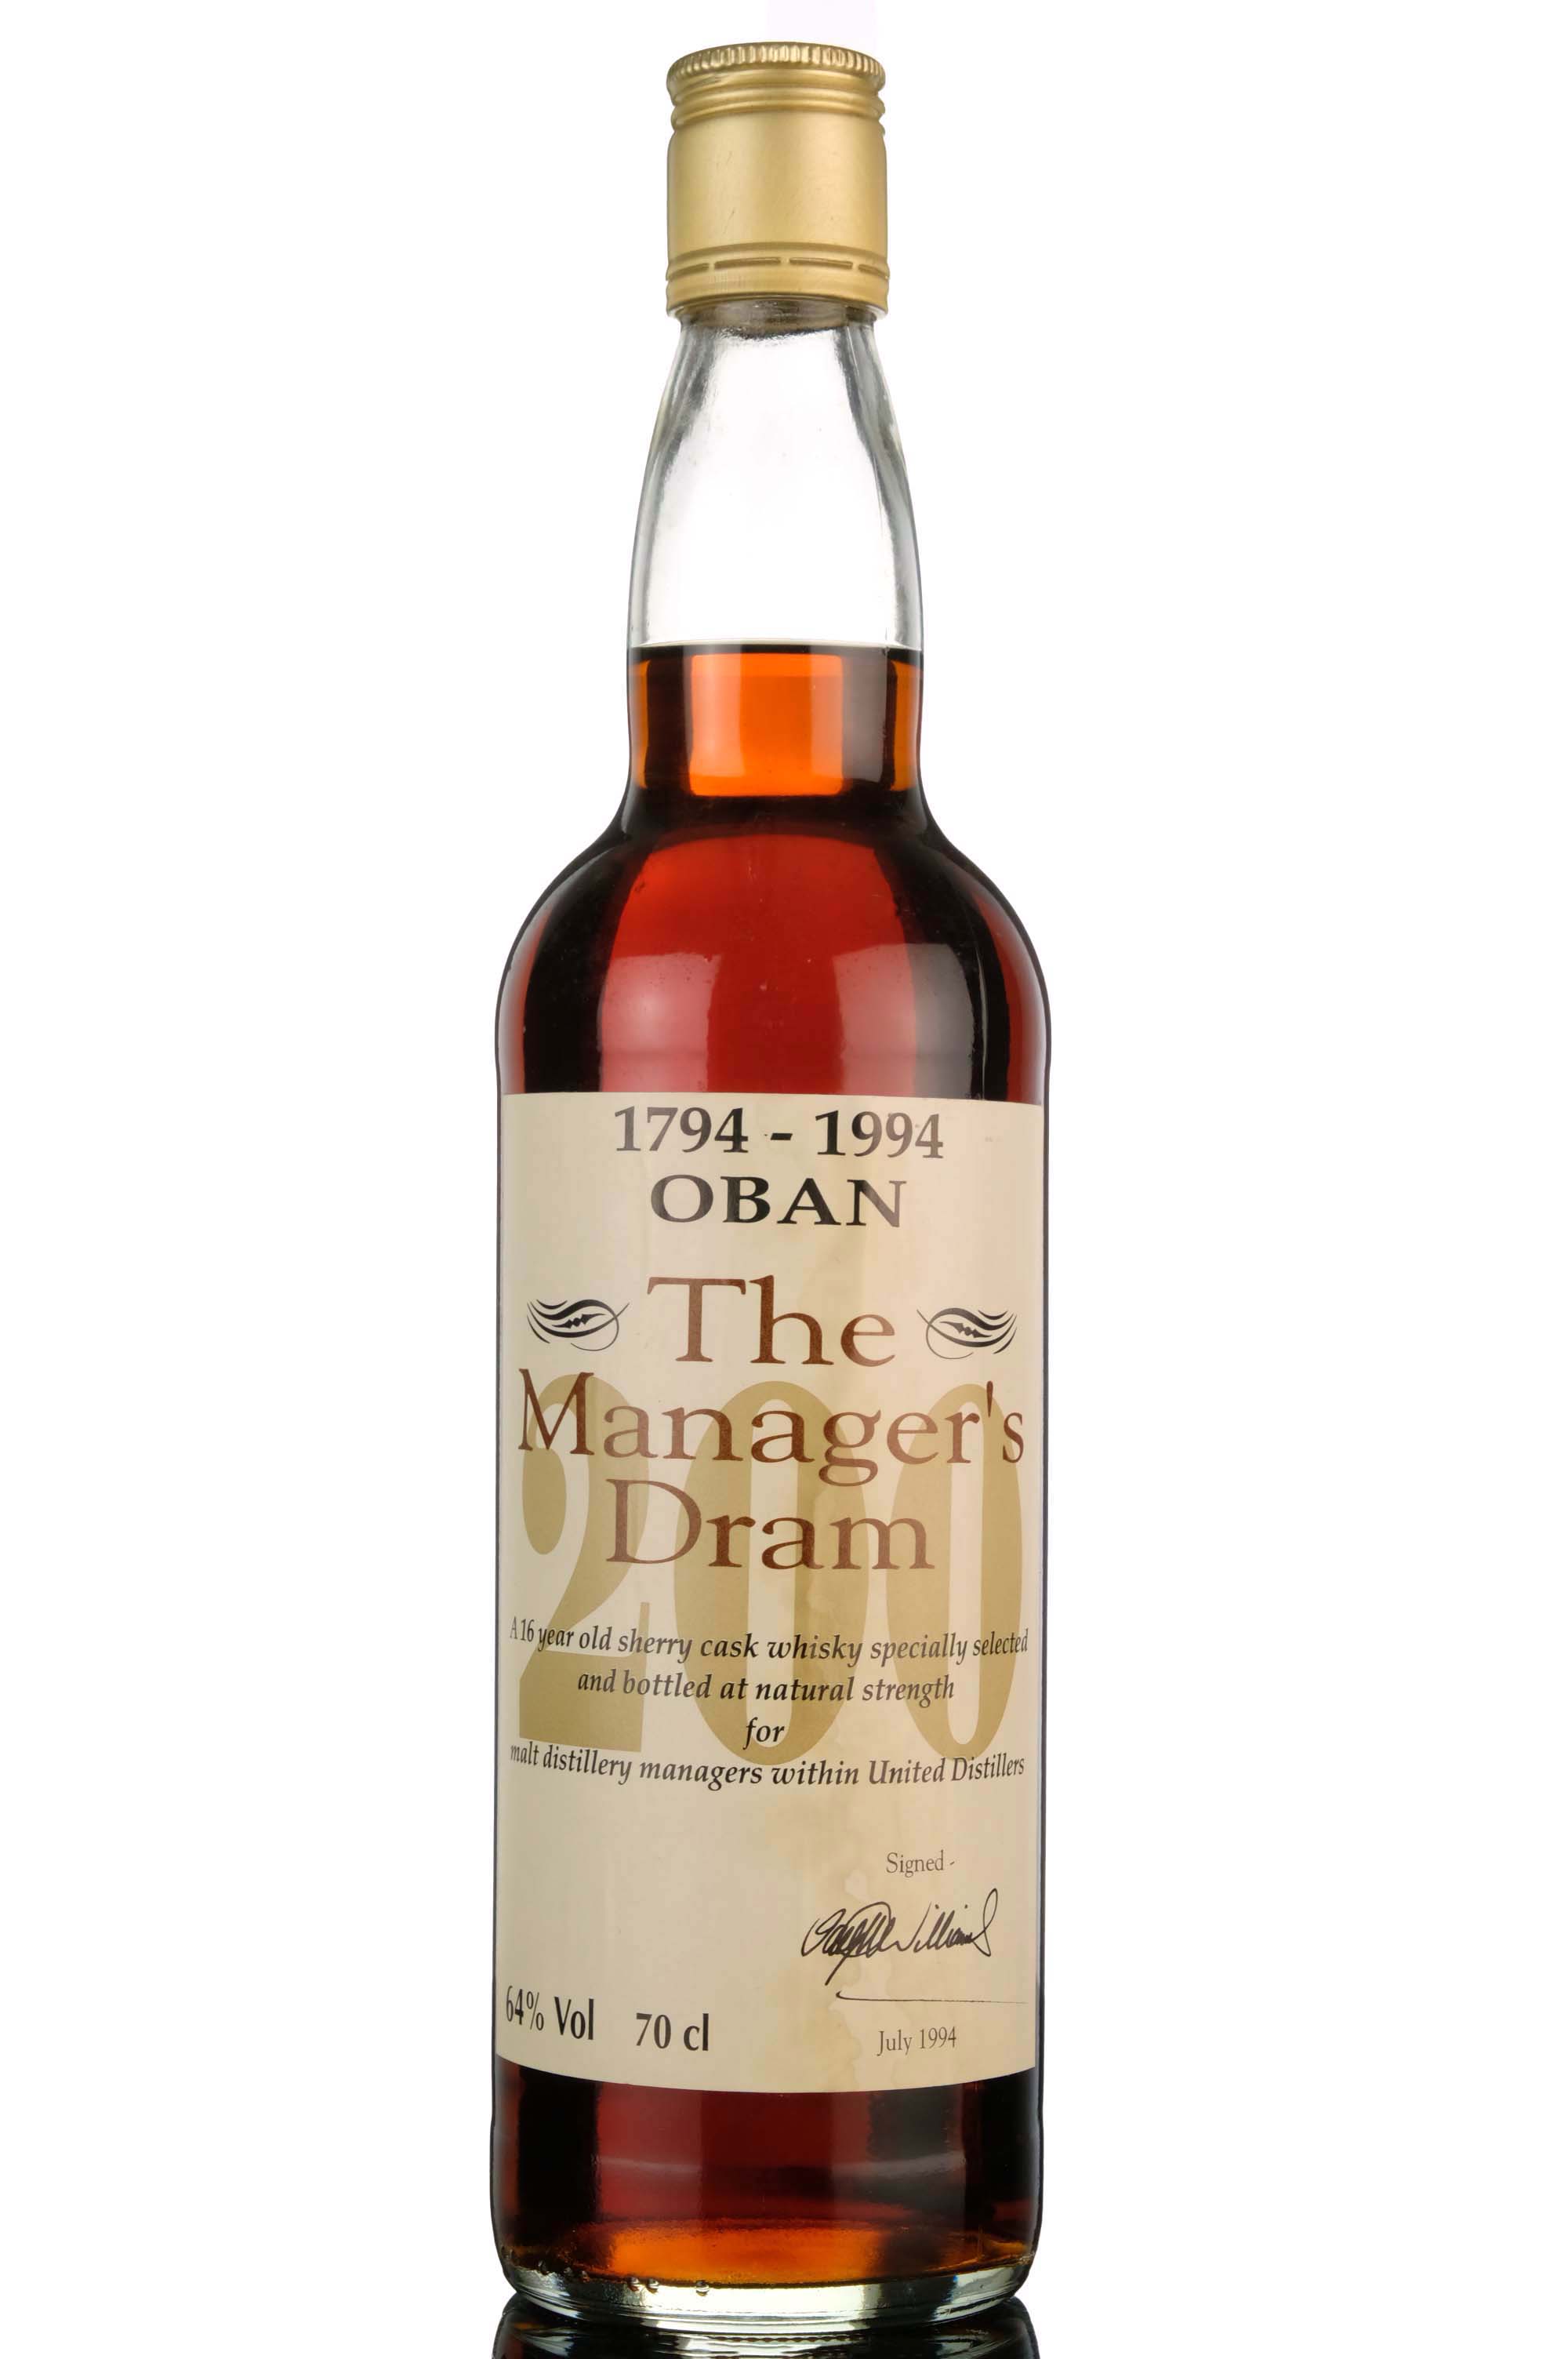 Oban 16 Year Old - Managers Dram 1994 - Bicentenary 1794-1994